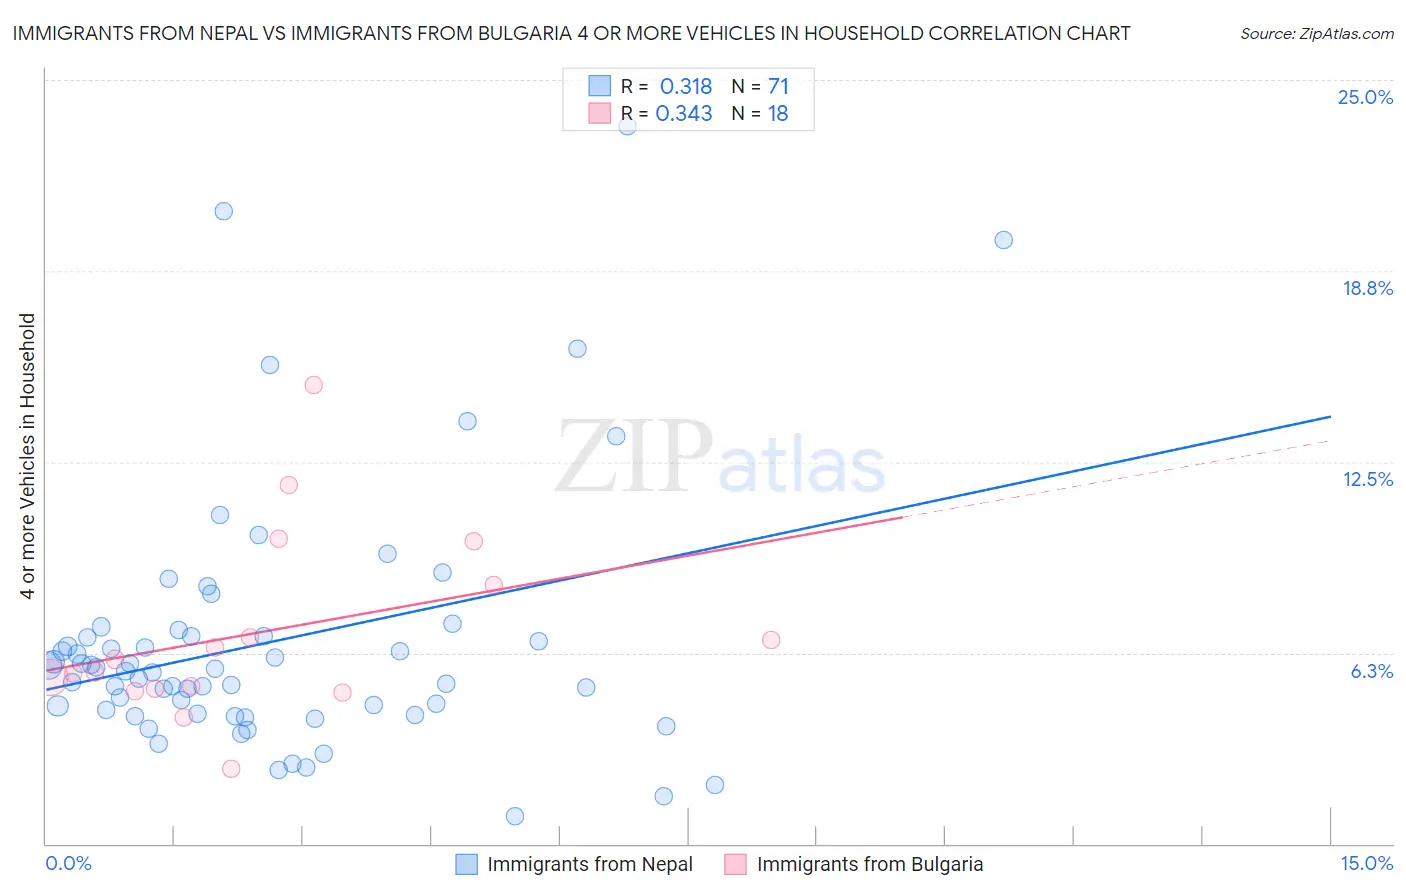 Immigrants from Nepal vs Immigrants from Bulgaria 4 or more Vehicles in Household